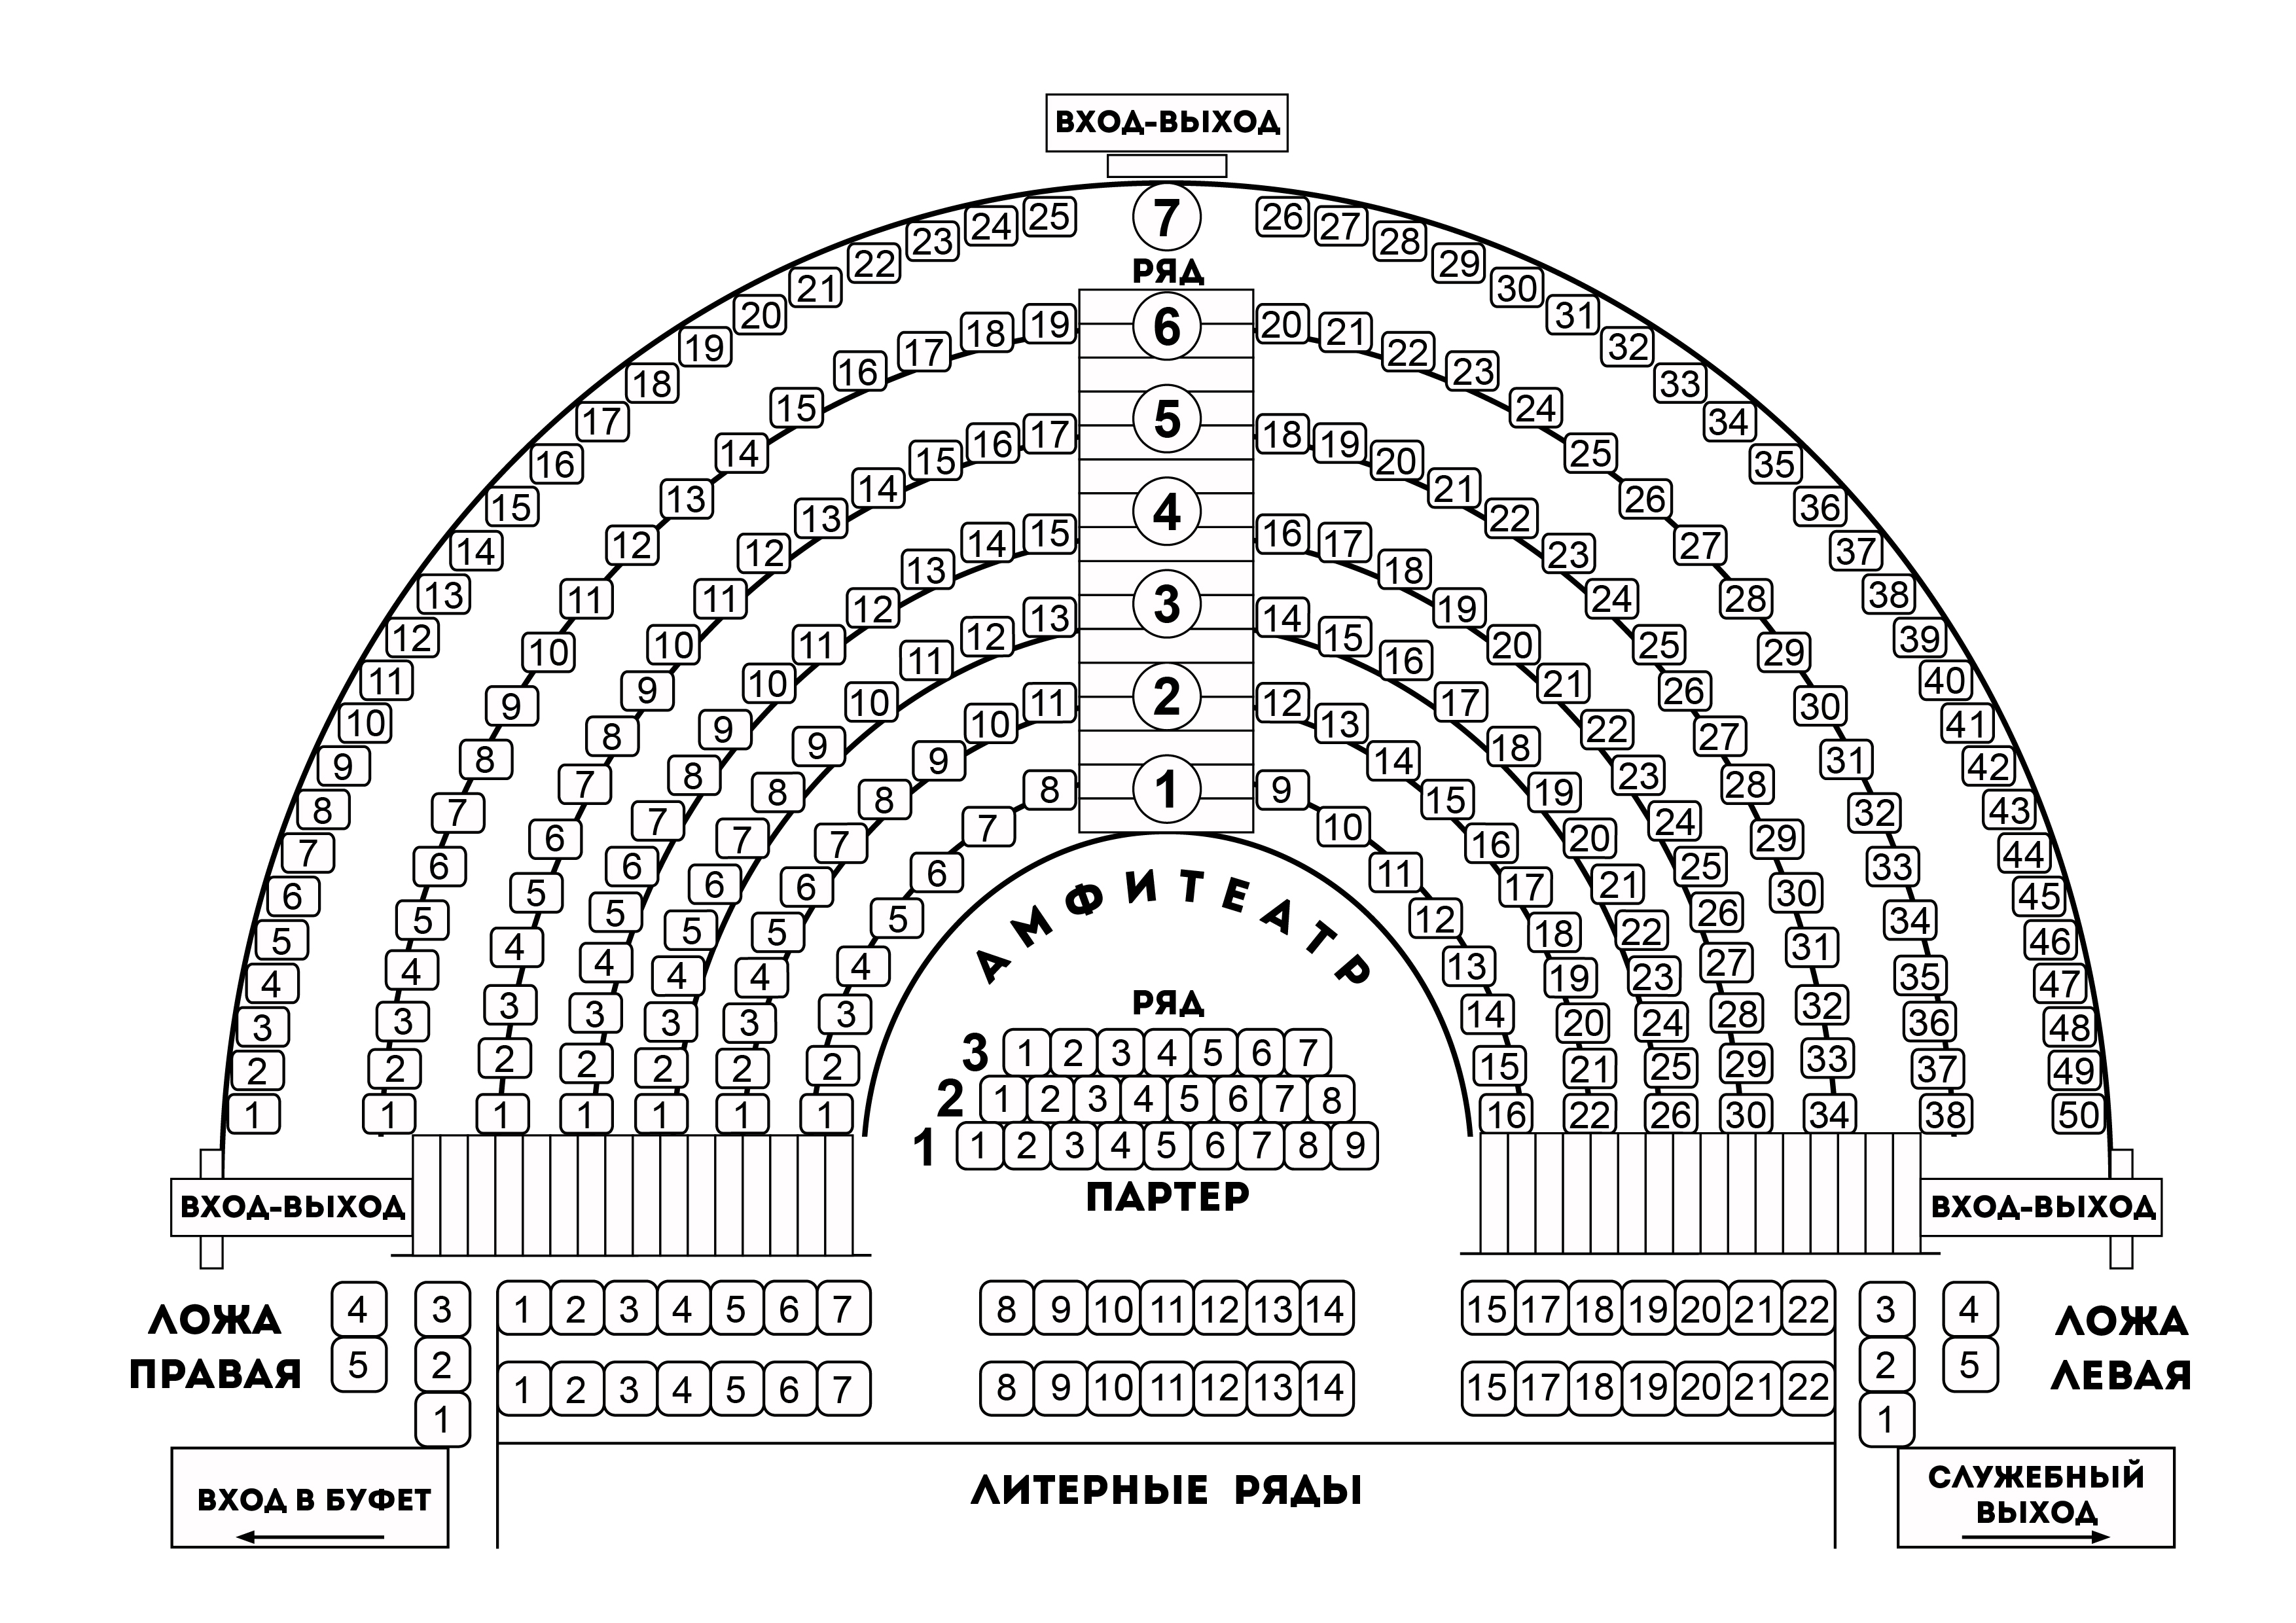 The plan of the hall of the Hermitage Theater with the numbering of seats